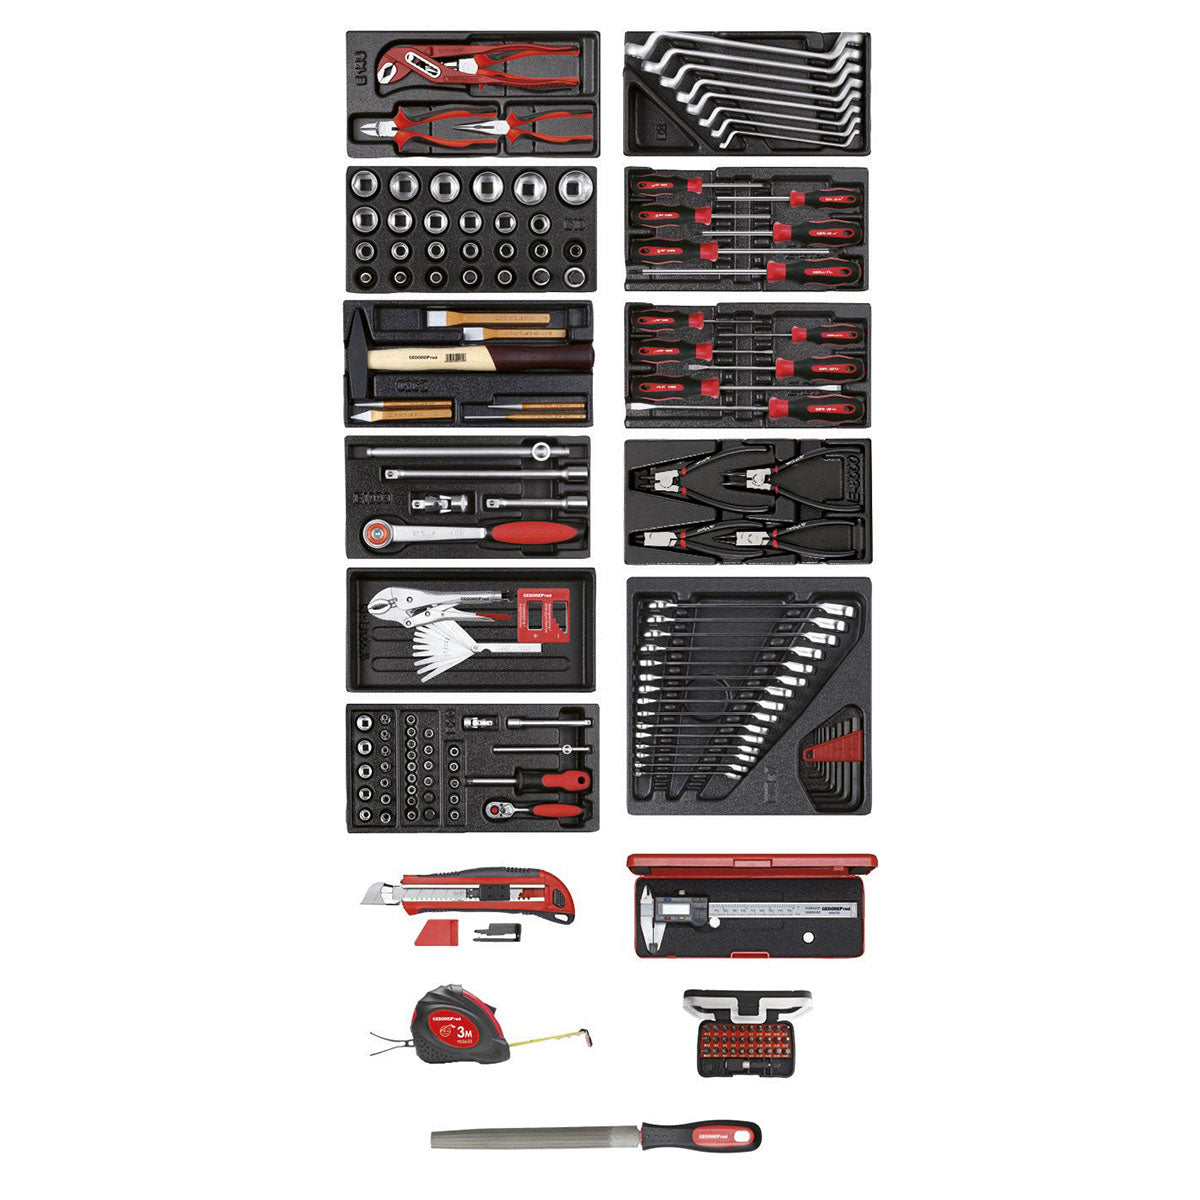 GEDORE red R21010002 - Tool set in 11 plastic modules, 167 pieces (3301657)